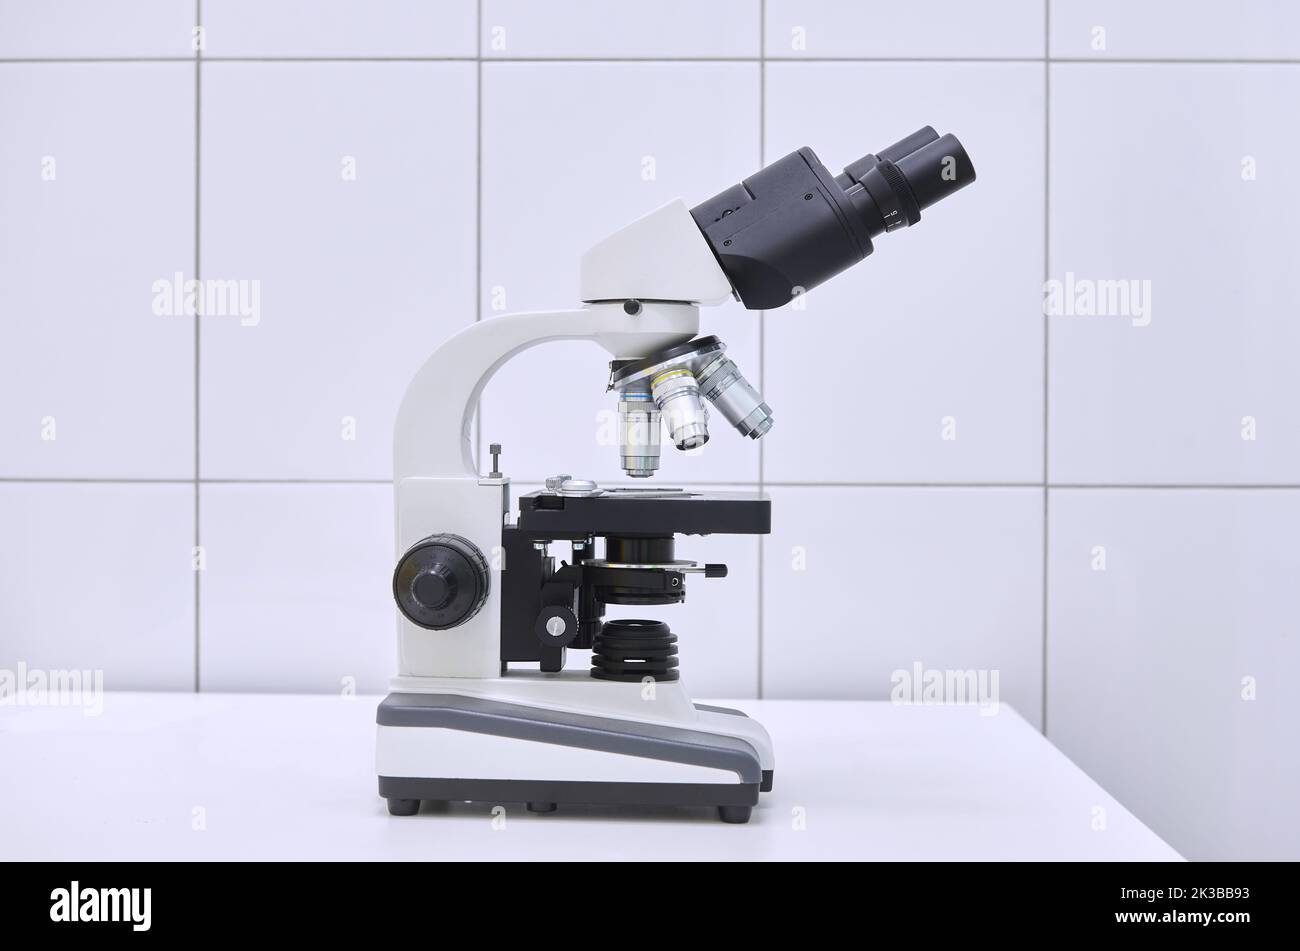 Microscope on a table in a medical laboratory. Stock Photo